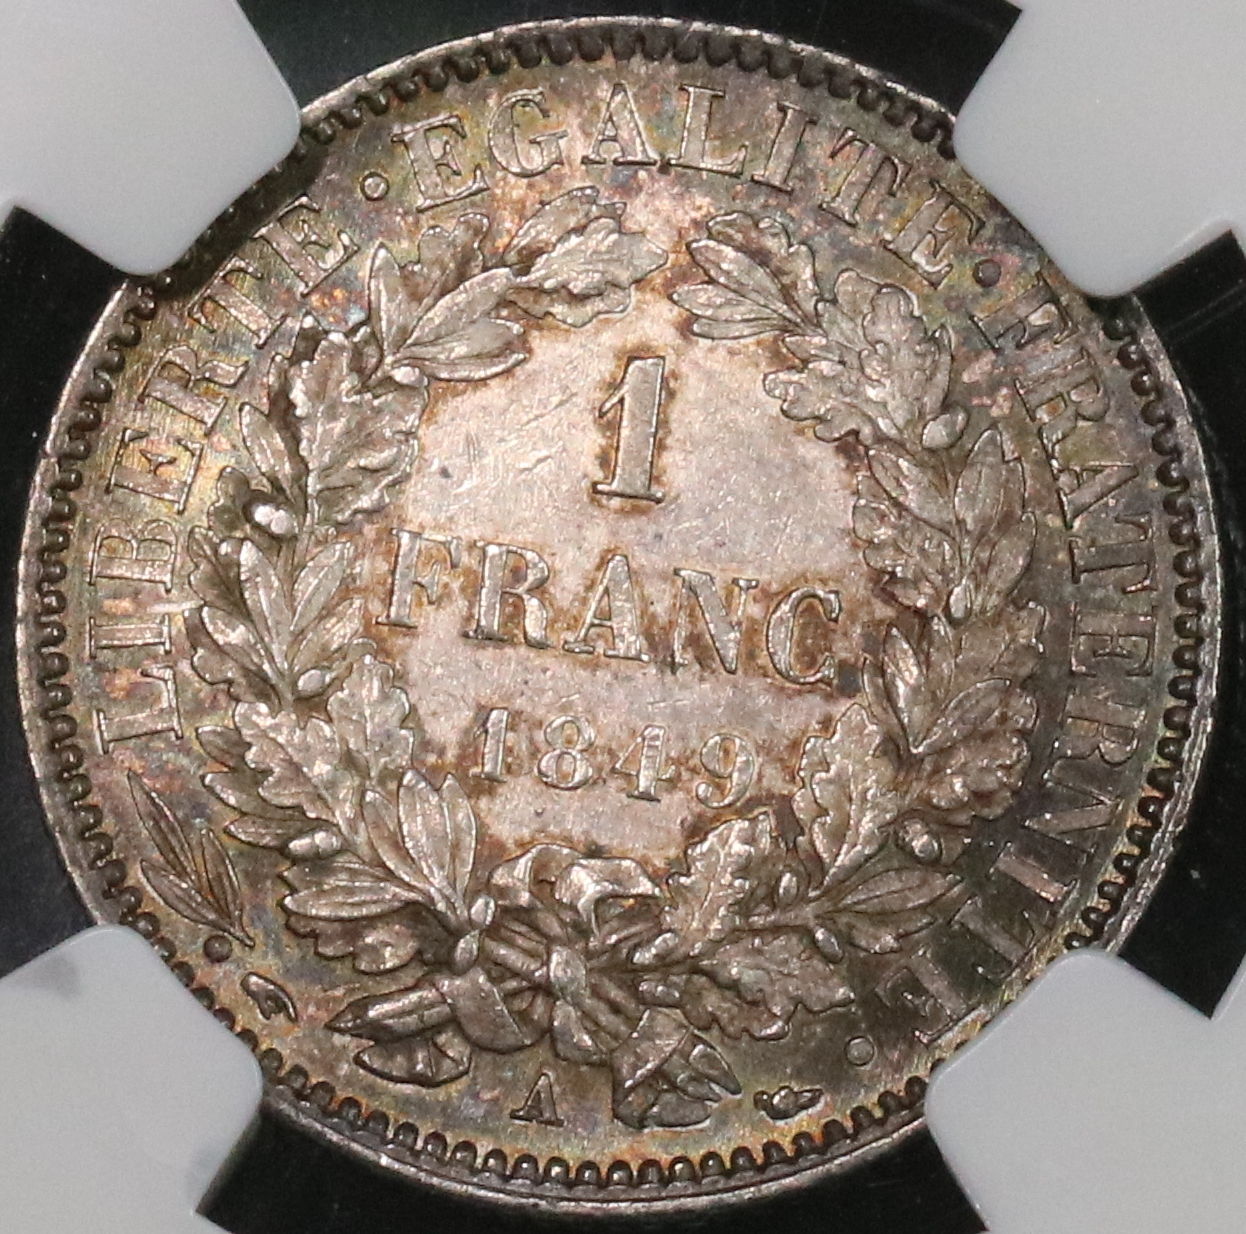 1849-A NGC MS 62 FRANCE Silver 1 Franc Ceres Coin (16103102C)